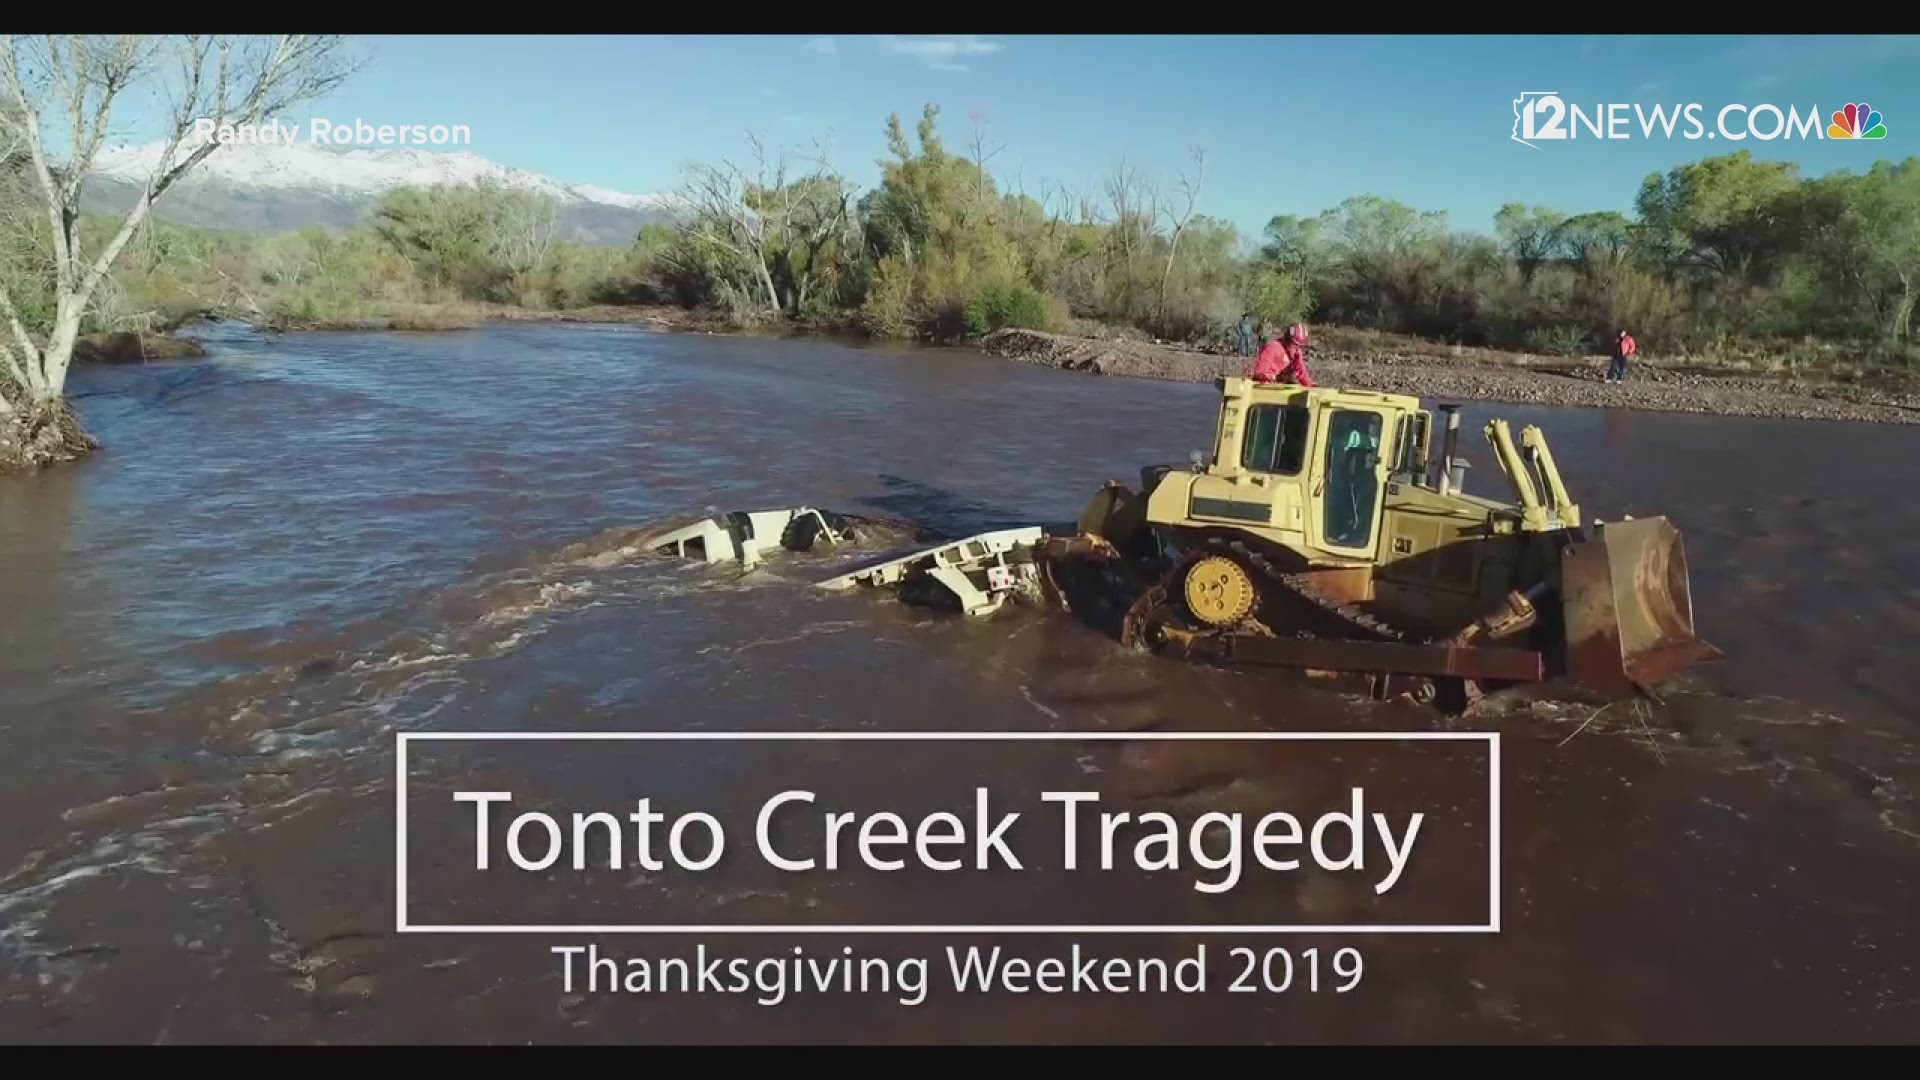 Following flooding in Tonto Basin Creek on Friday two children were found dead. The search for a 6-year-old is ongoing. Video shows the truck being recovered.